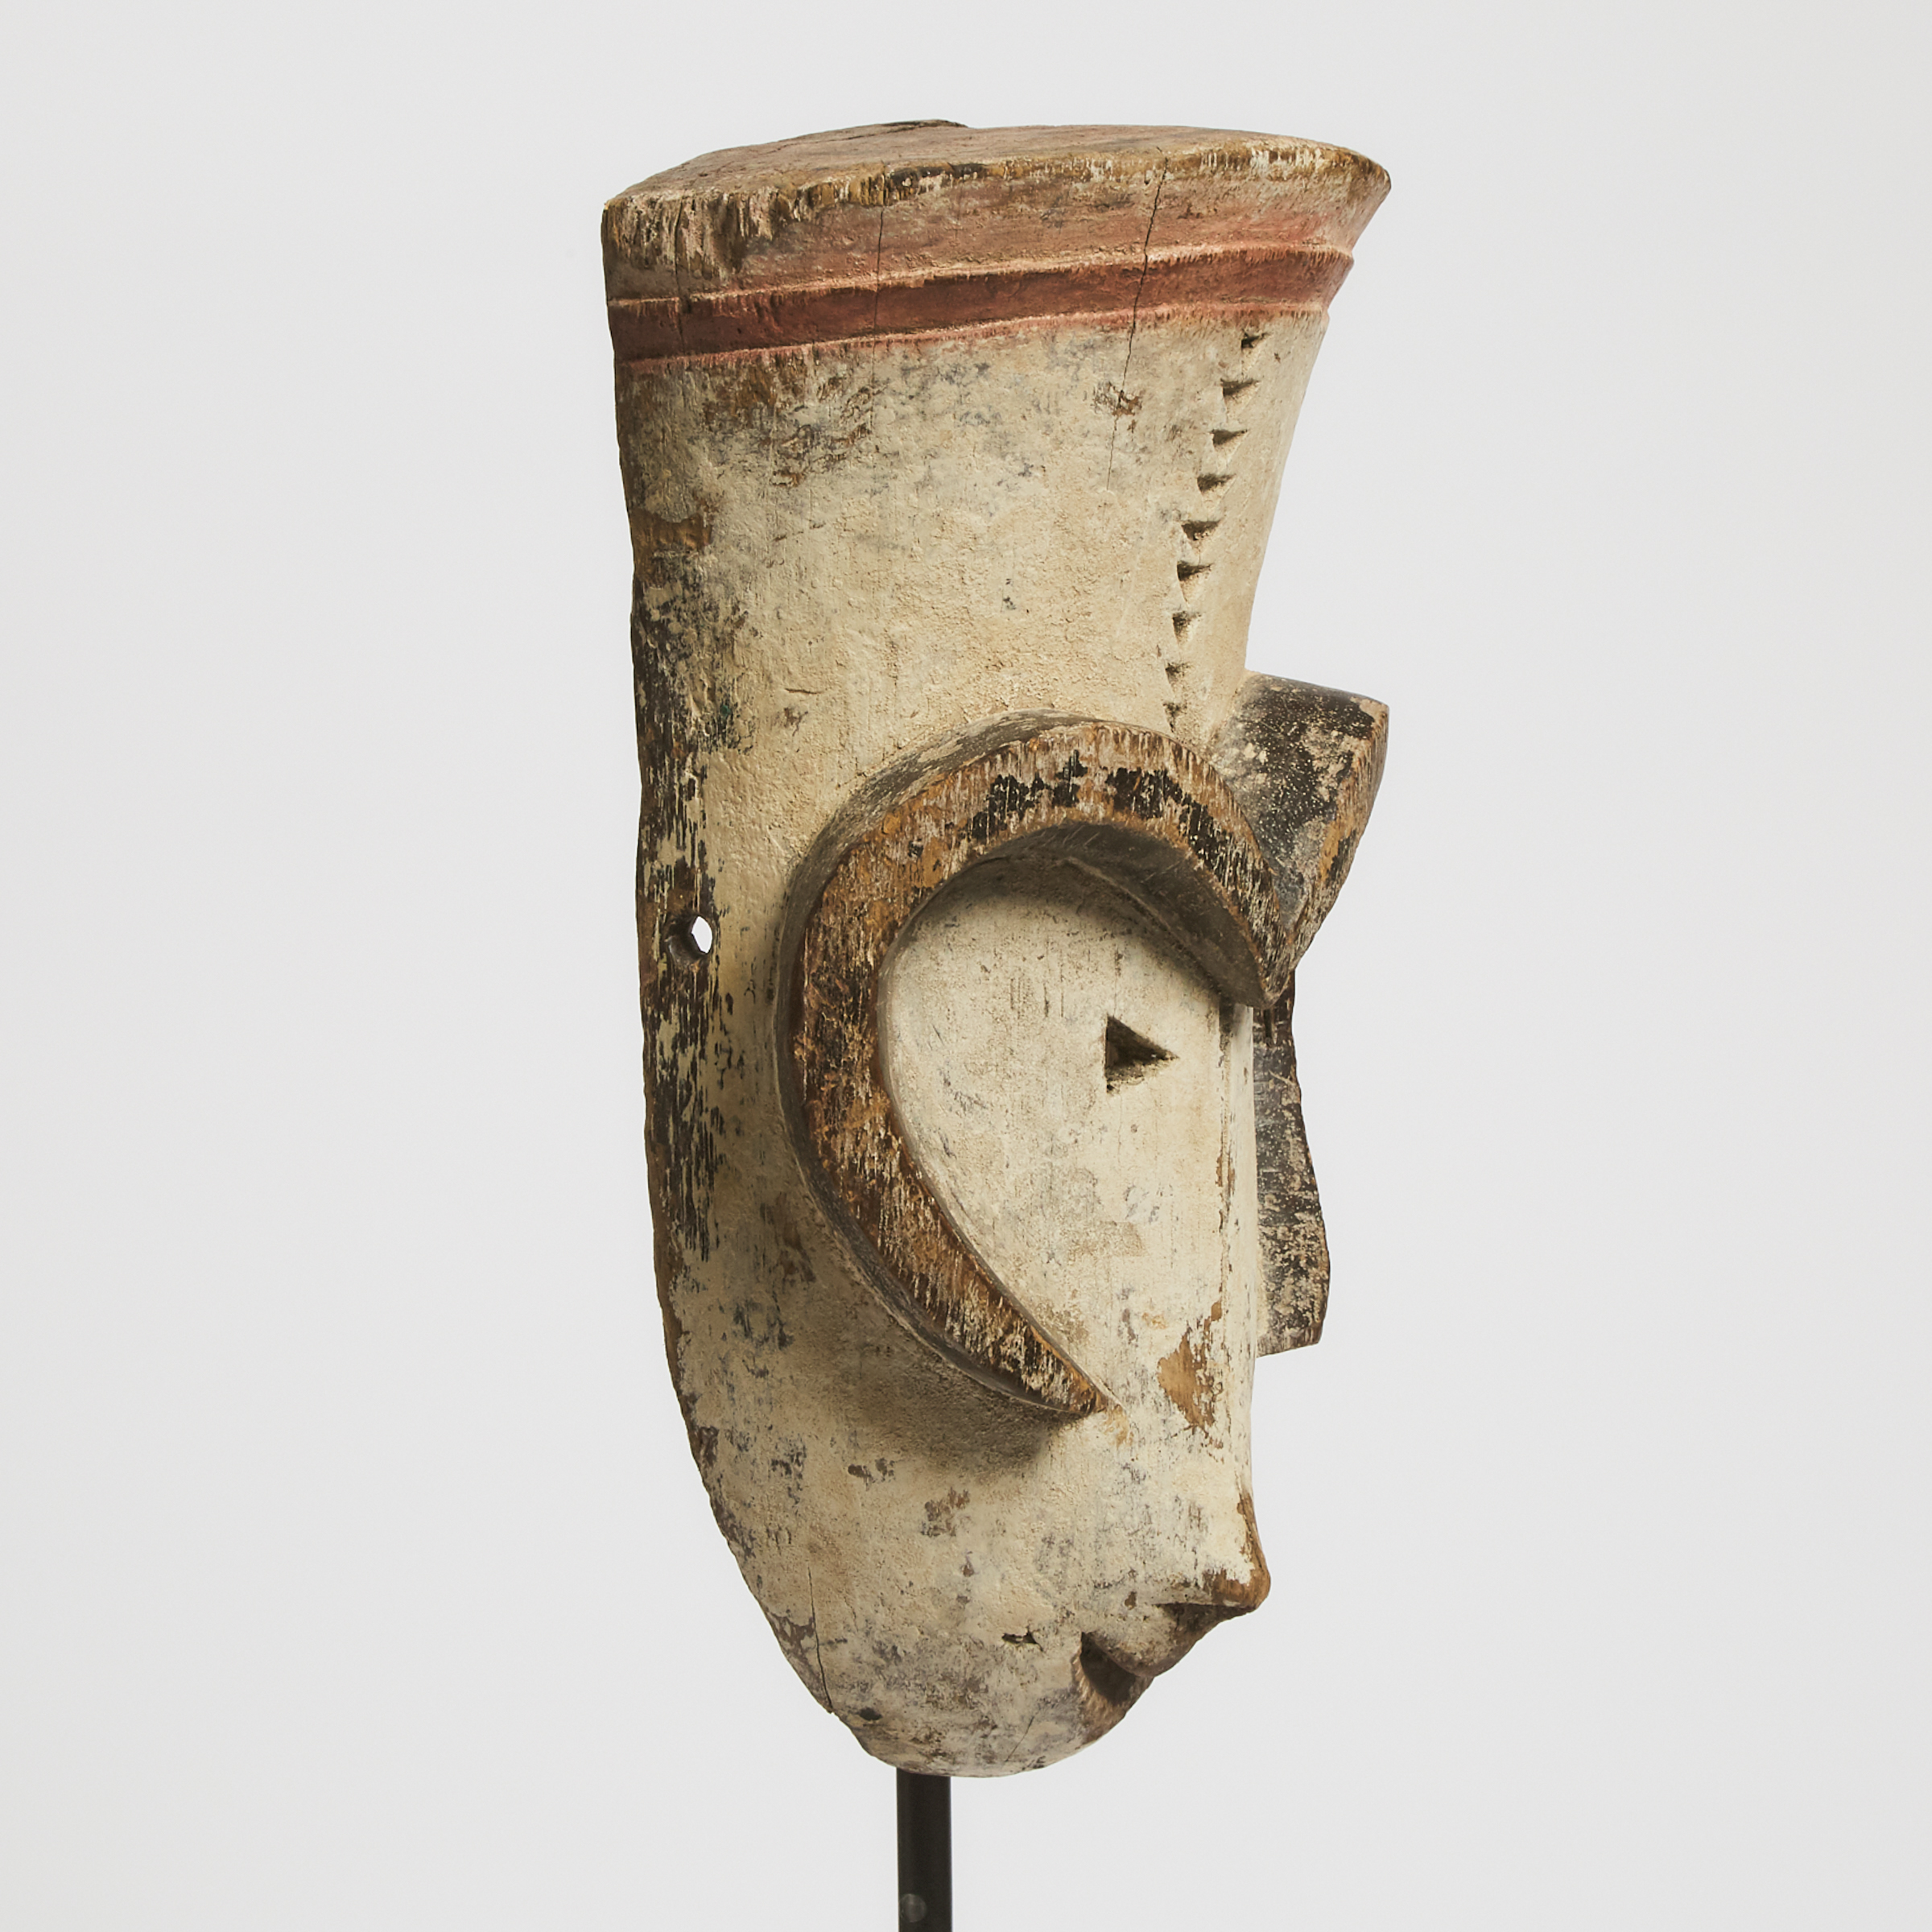 Gabon Mask, Possibly Fang, Central Africa, early to mid 20th century